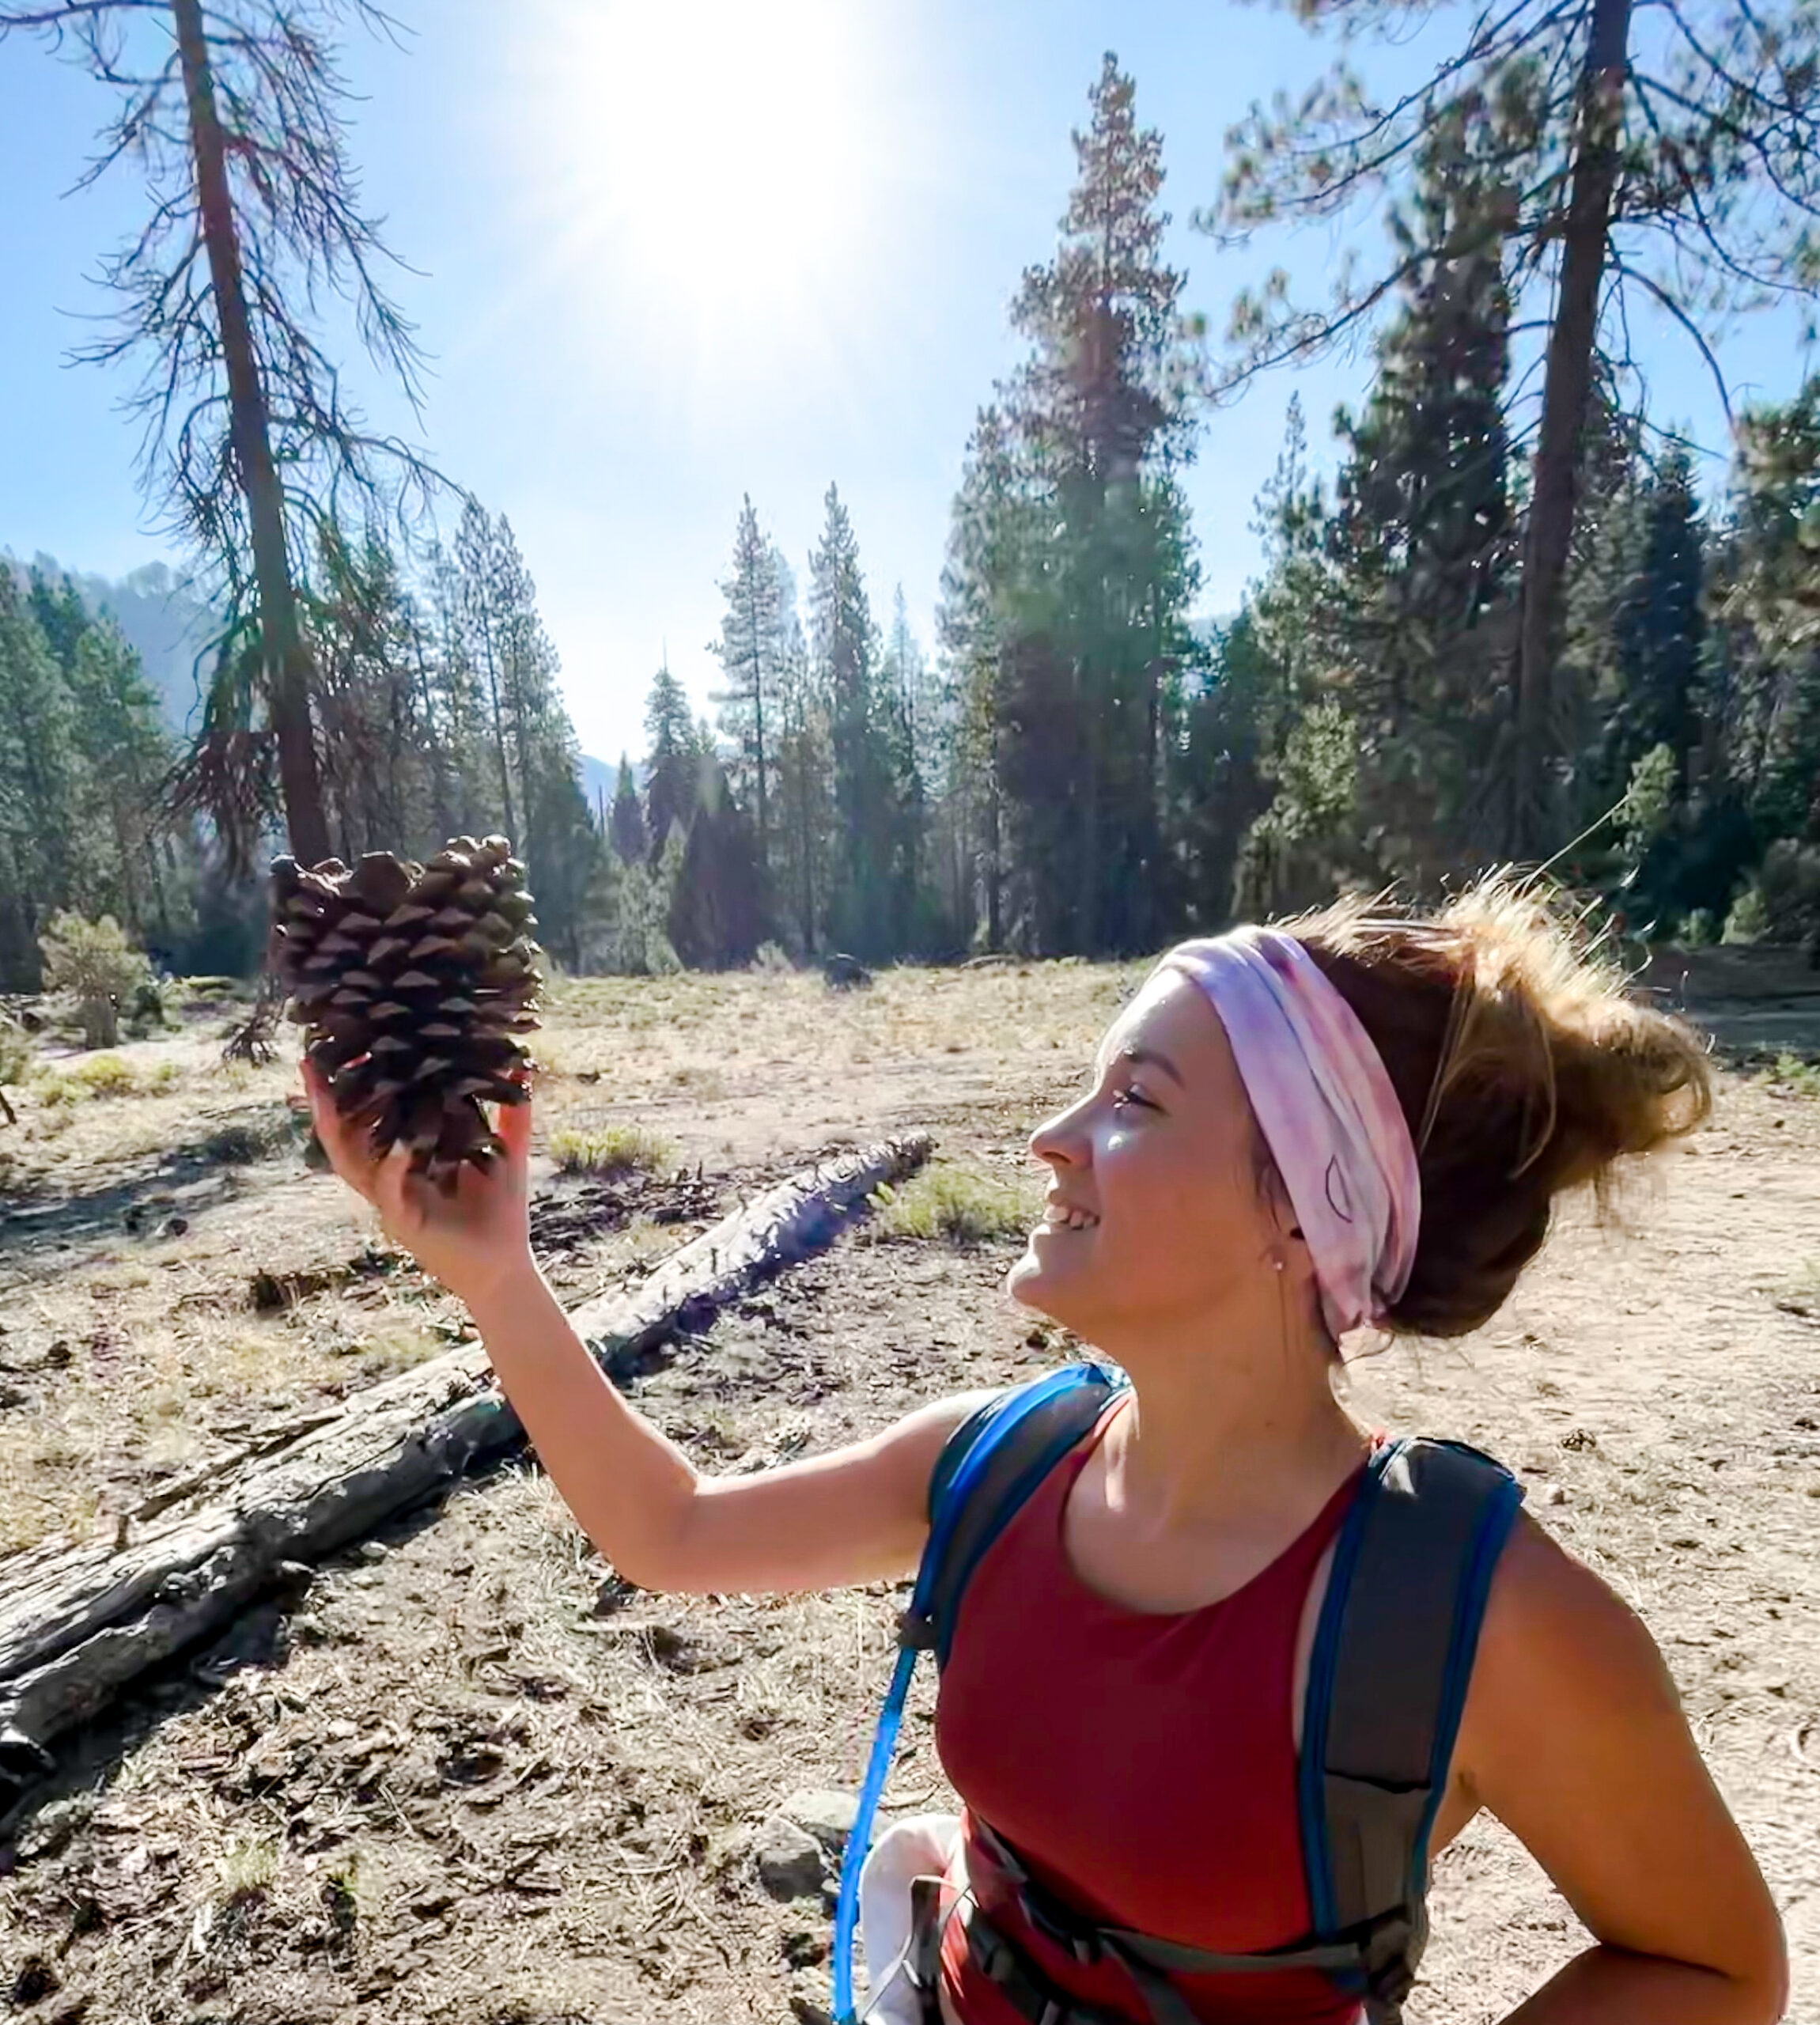 Large pinecone on the Half Dome Trail